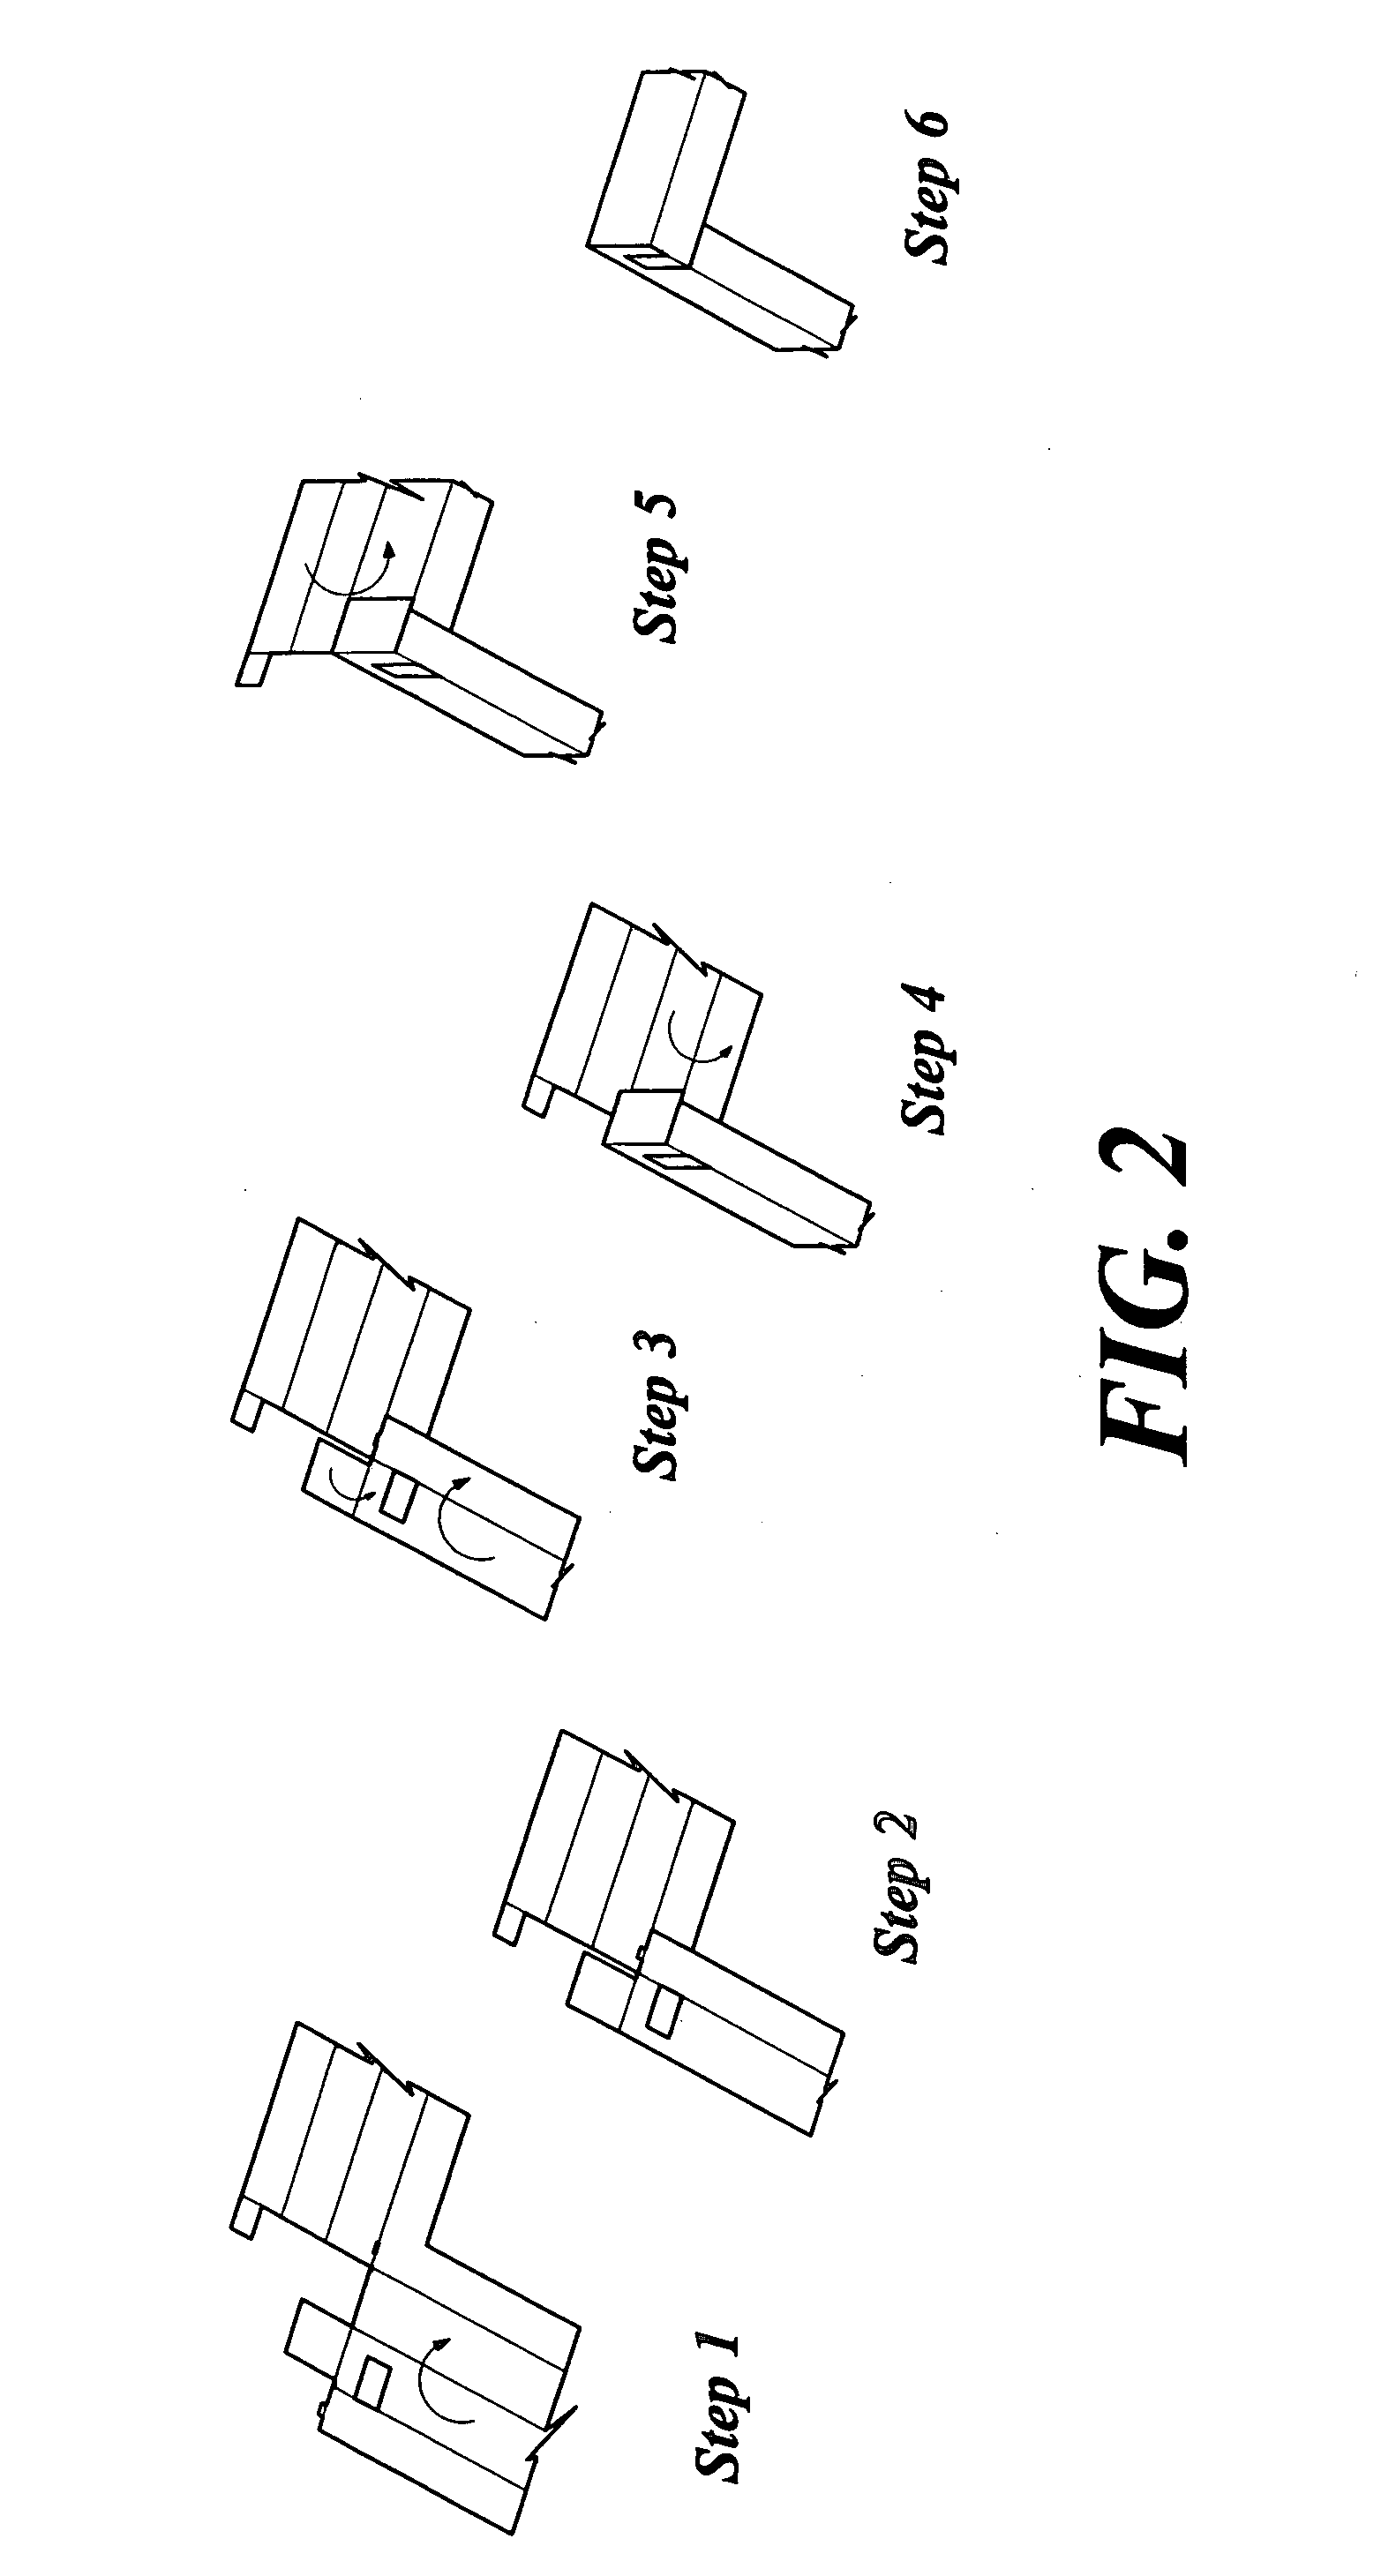 Planar filter frame with corner latch and method of folding